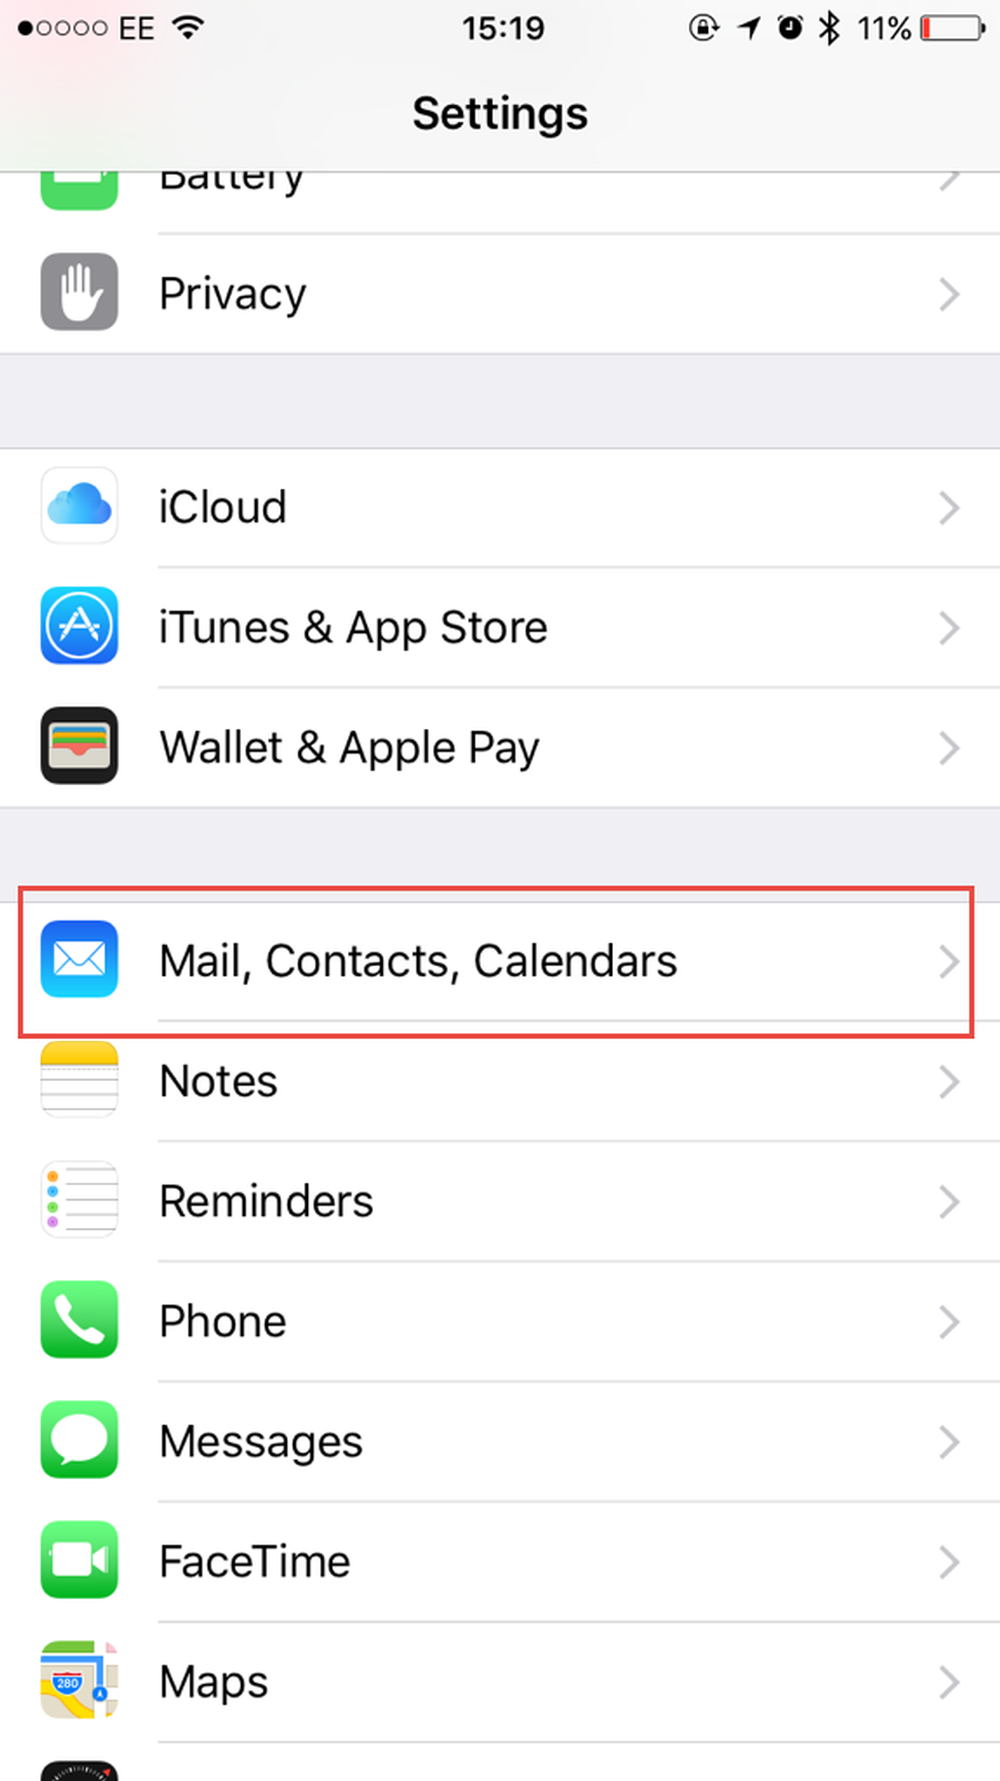 Go to settings and choose mail